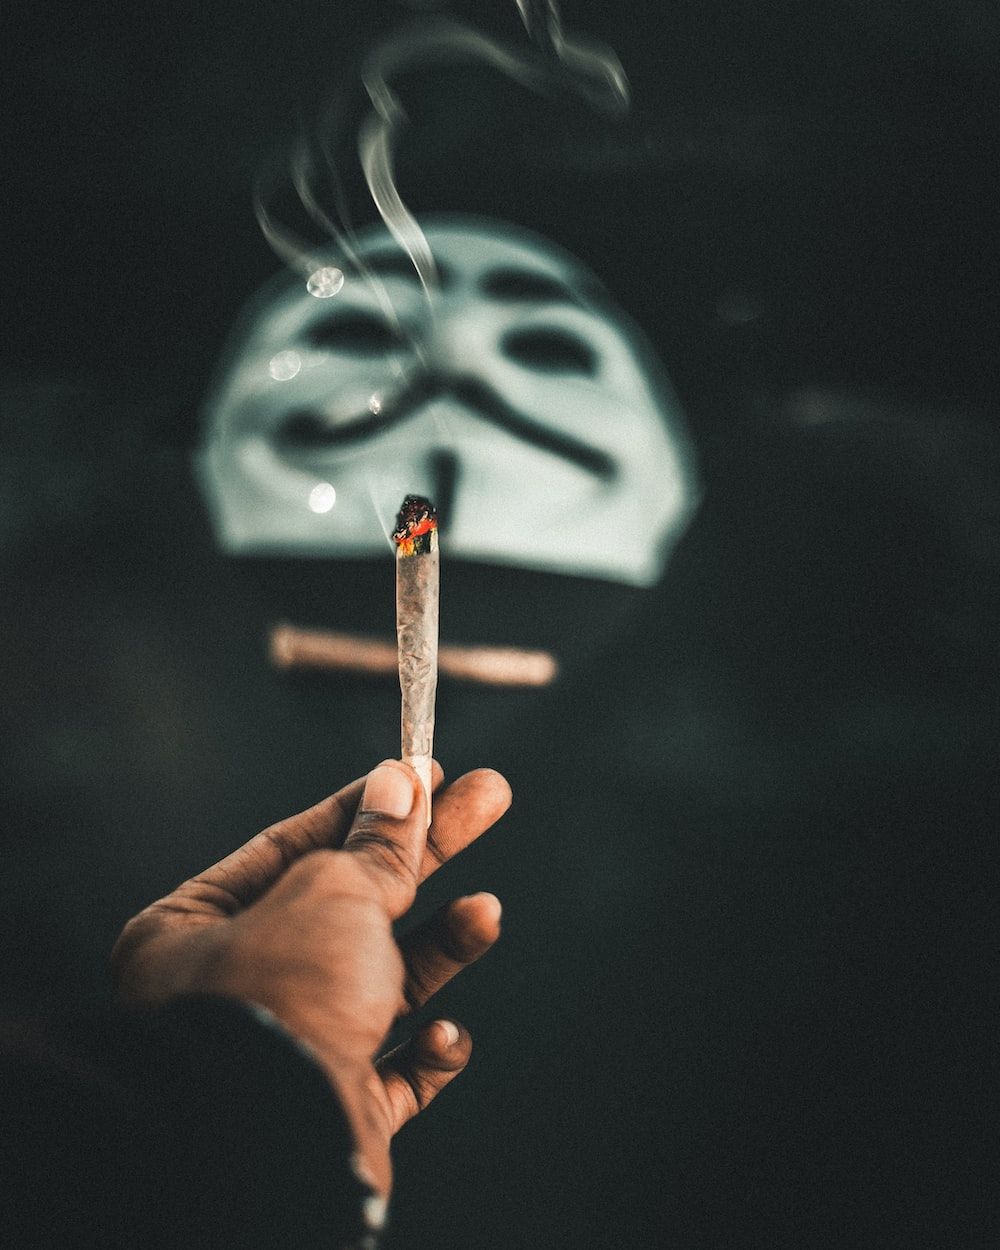 A person holding a lit cannabis joint in their hand - Smoke